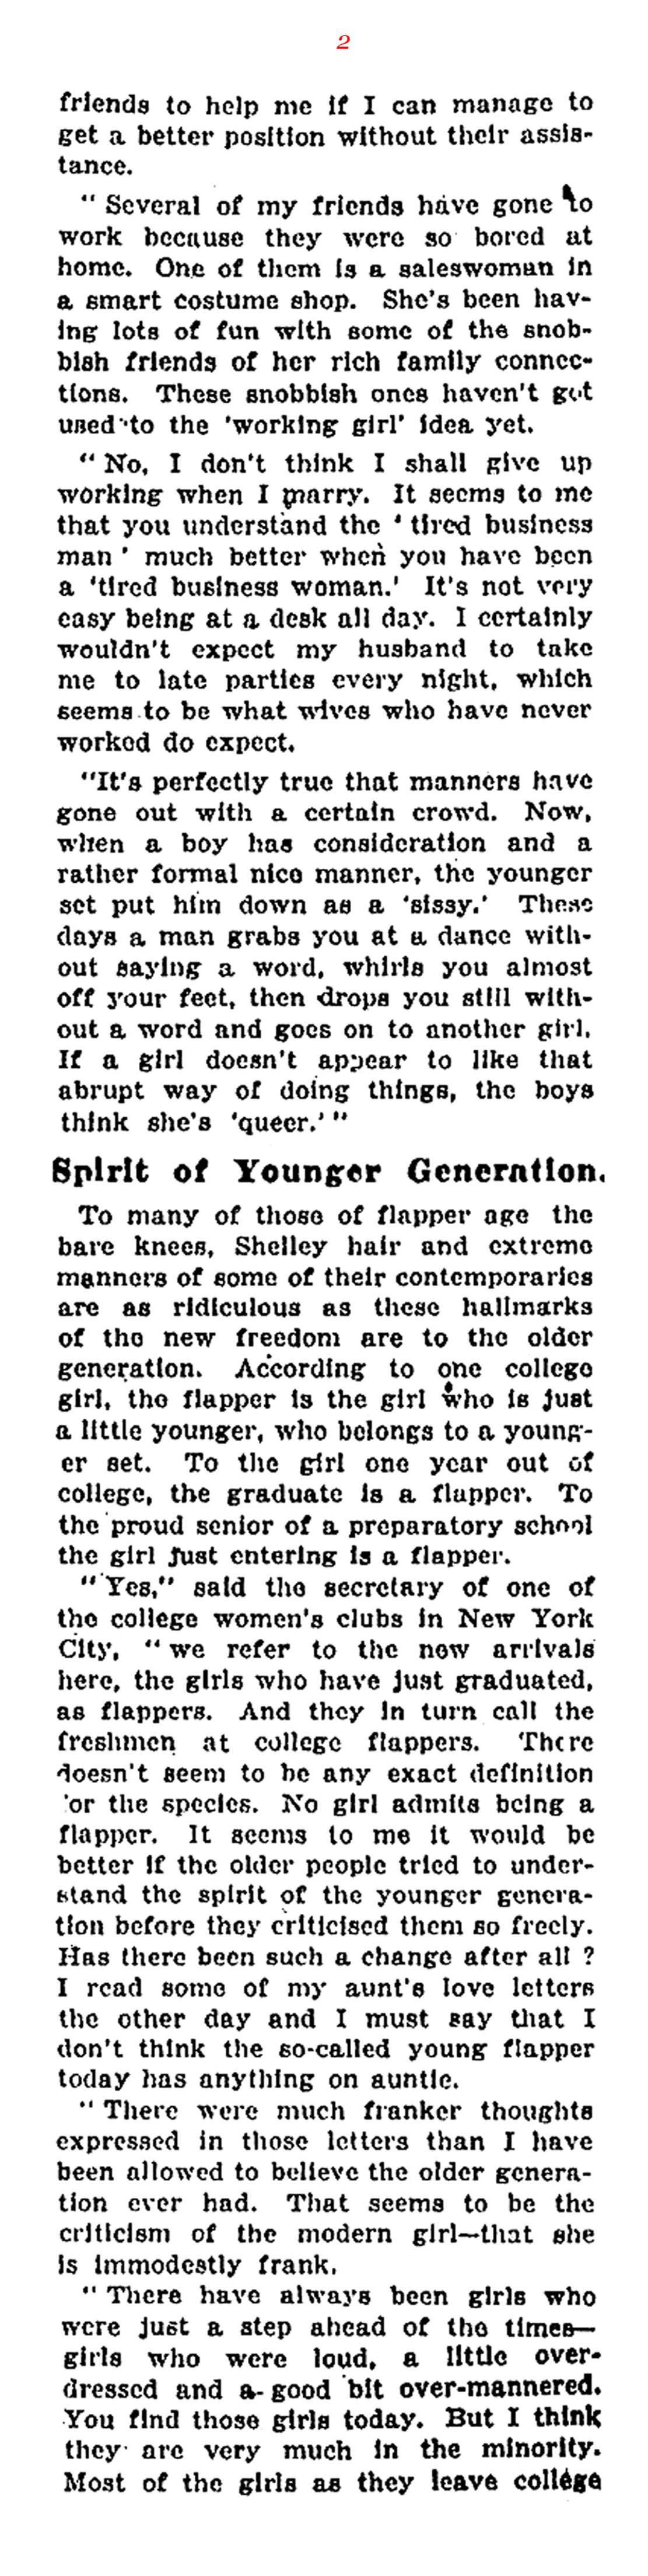 The Spirit of Flappers  (NY Times, 1922)